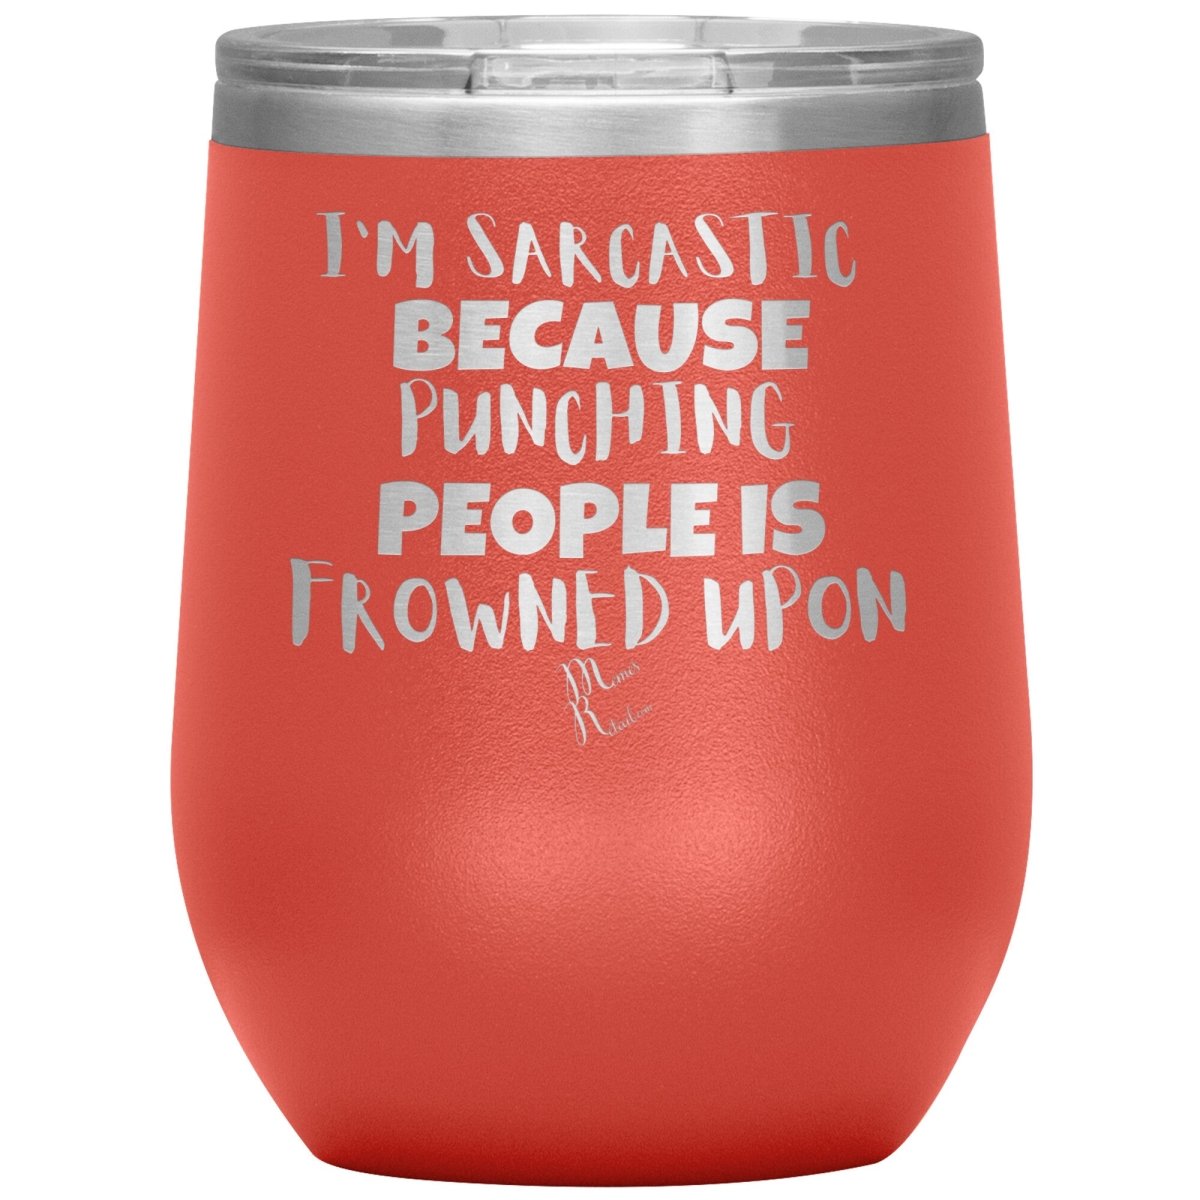 I'm Sarcastic Because Punching People is Frowned Upon Tumblers, 12oz Wine Insulated Tumbler / Coral - MemesRetail.com